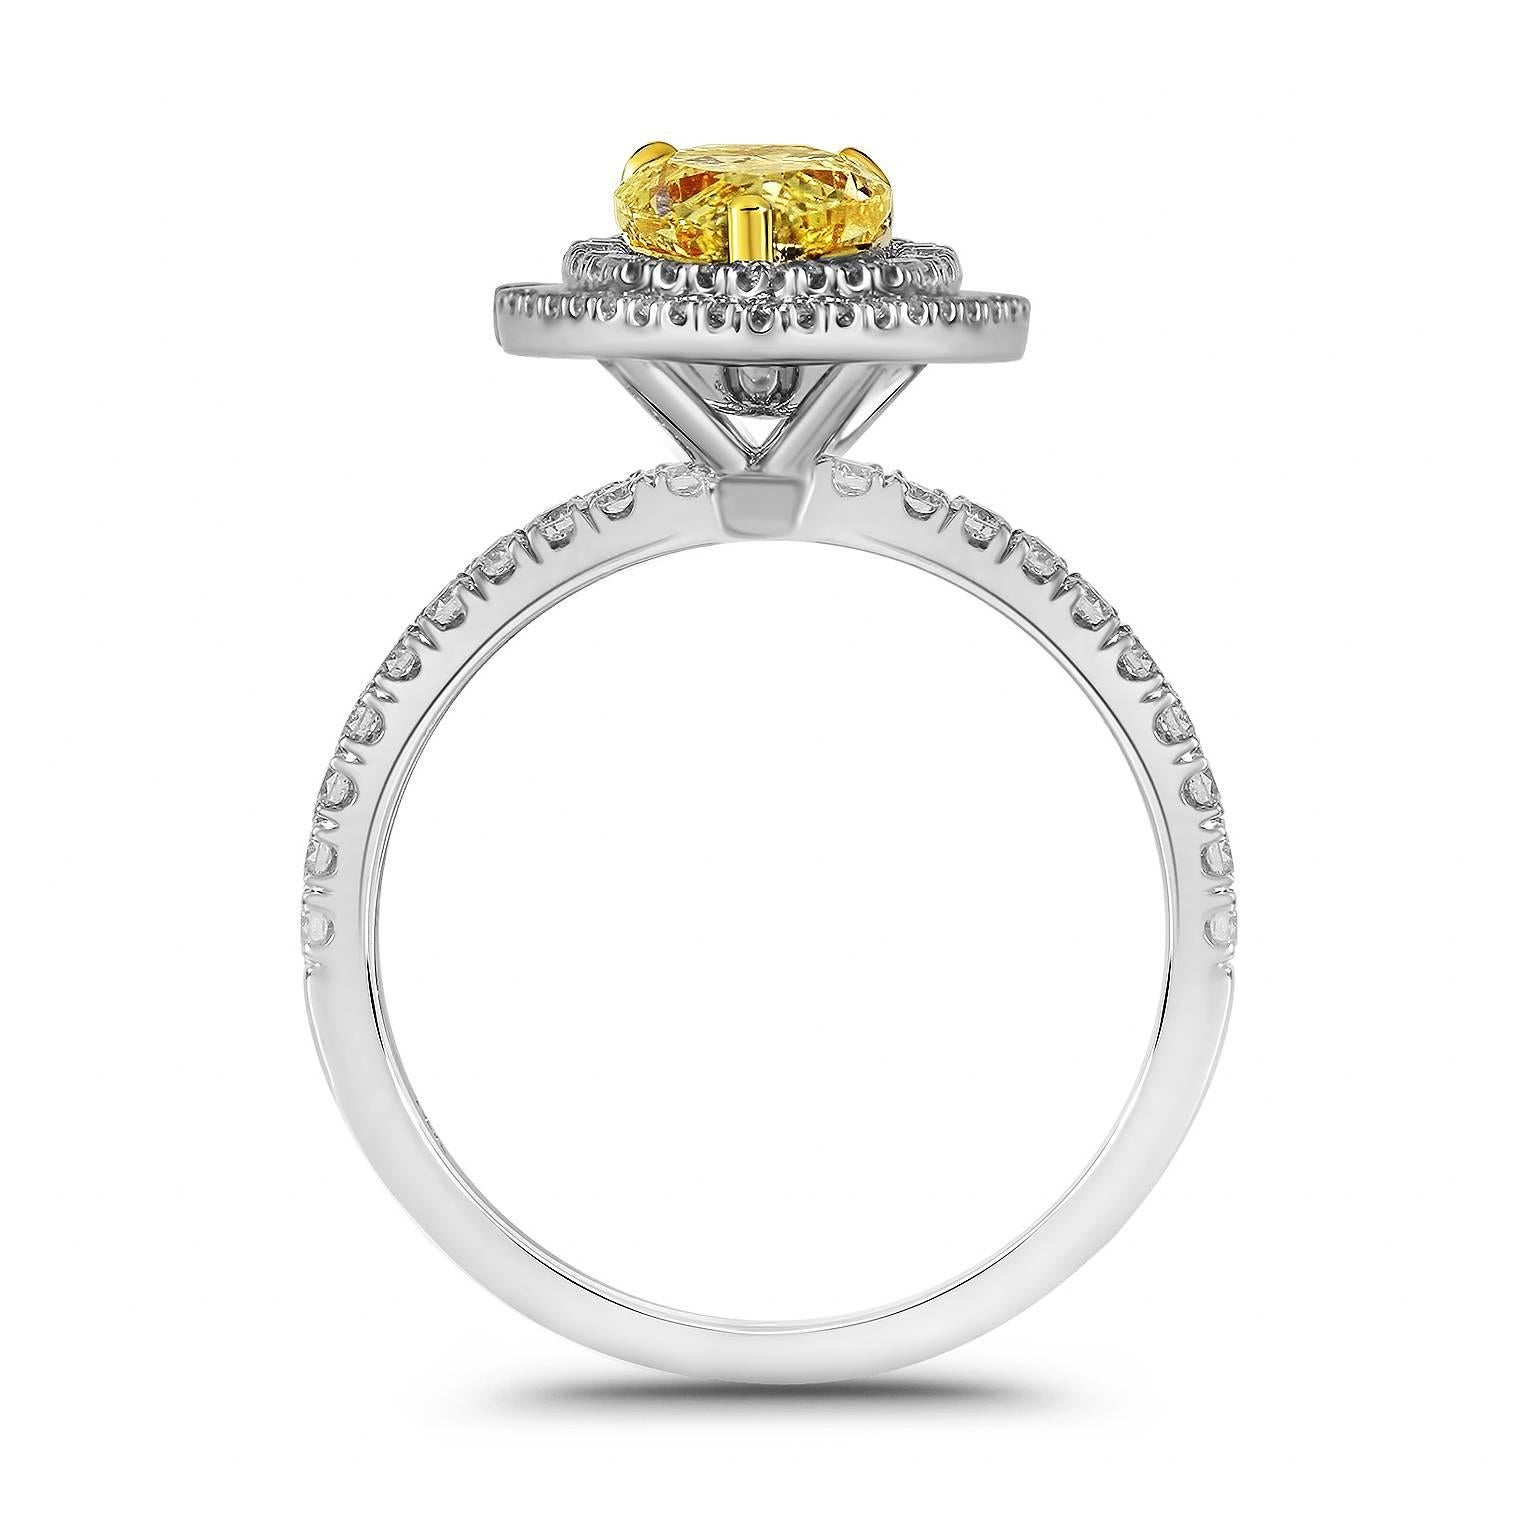 We present this striking, Diamond Engagement Ring skillfully crafted from 14K gold symbolizing everlasting love and commitment!  

The center stone carried on this piece is a 1.46ct Fancy Yellow Pear Shape GIA certified diamond with SI1 clarity. 